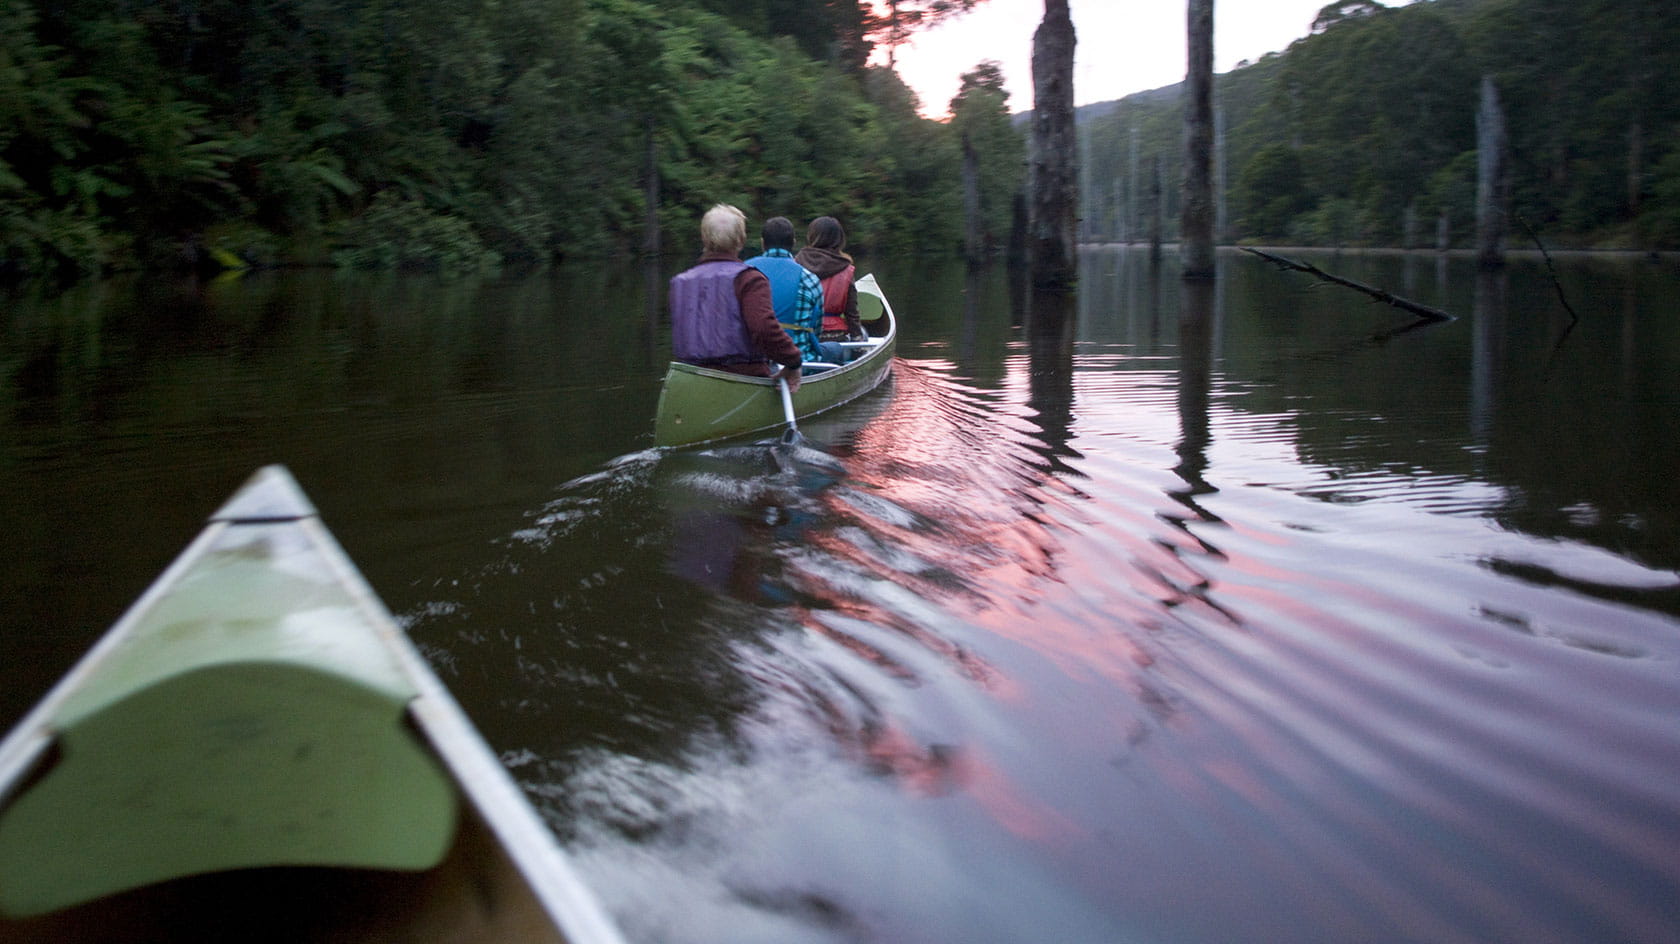 People canoeing on a lake